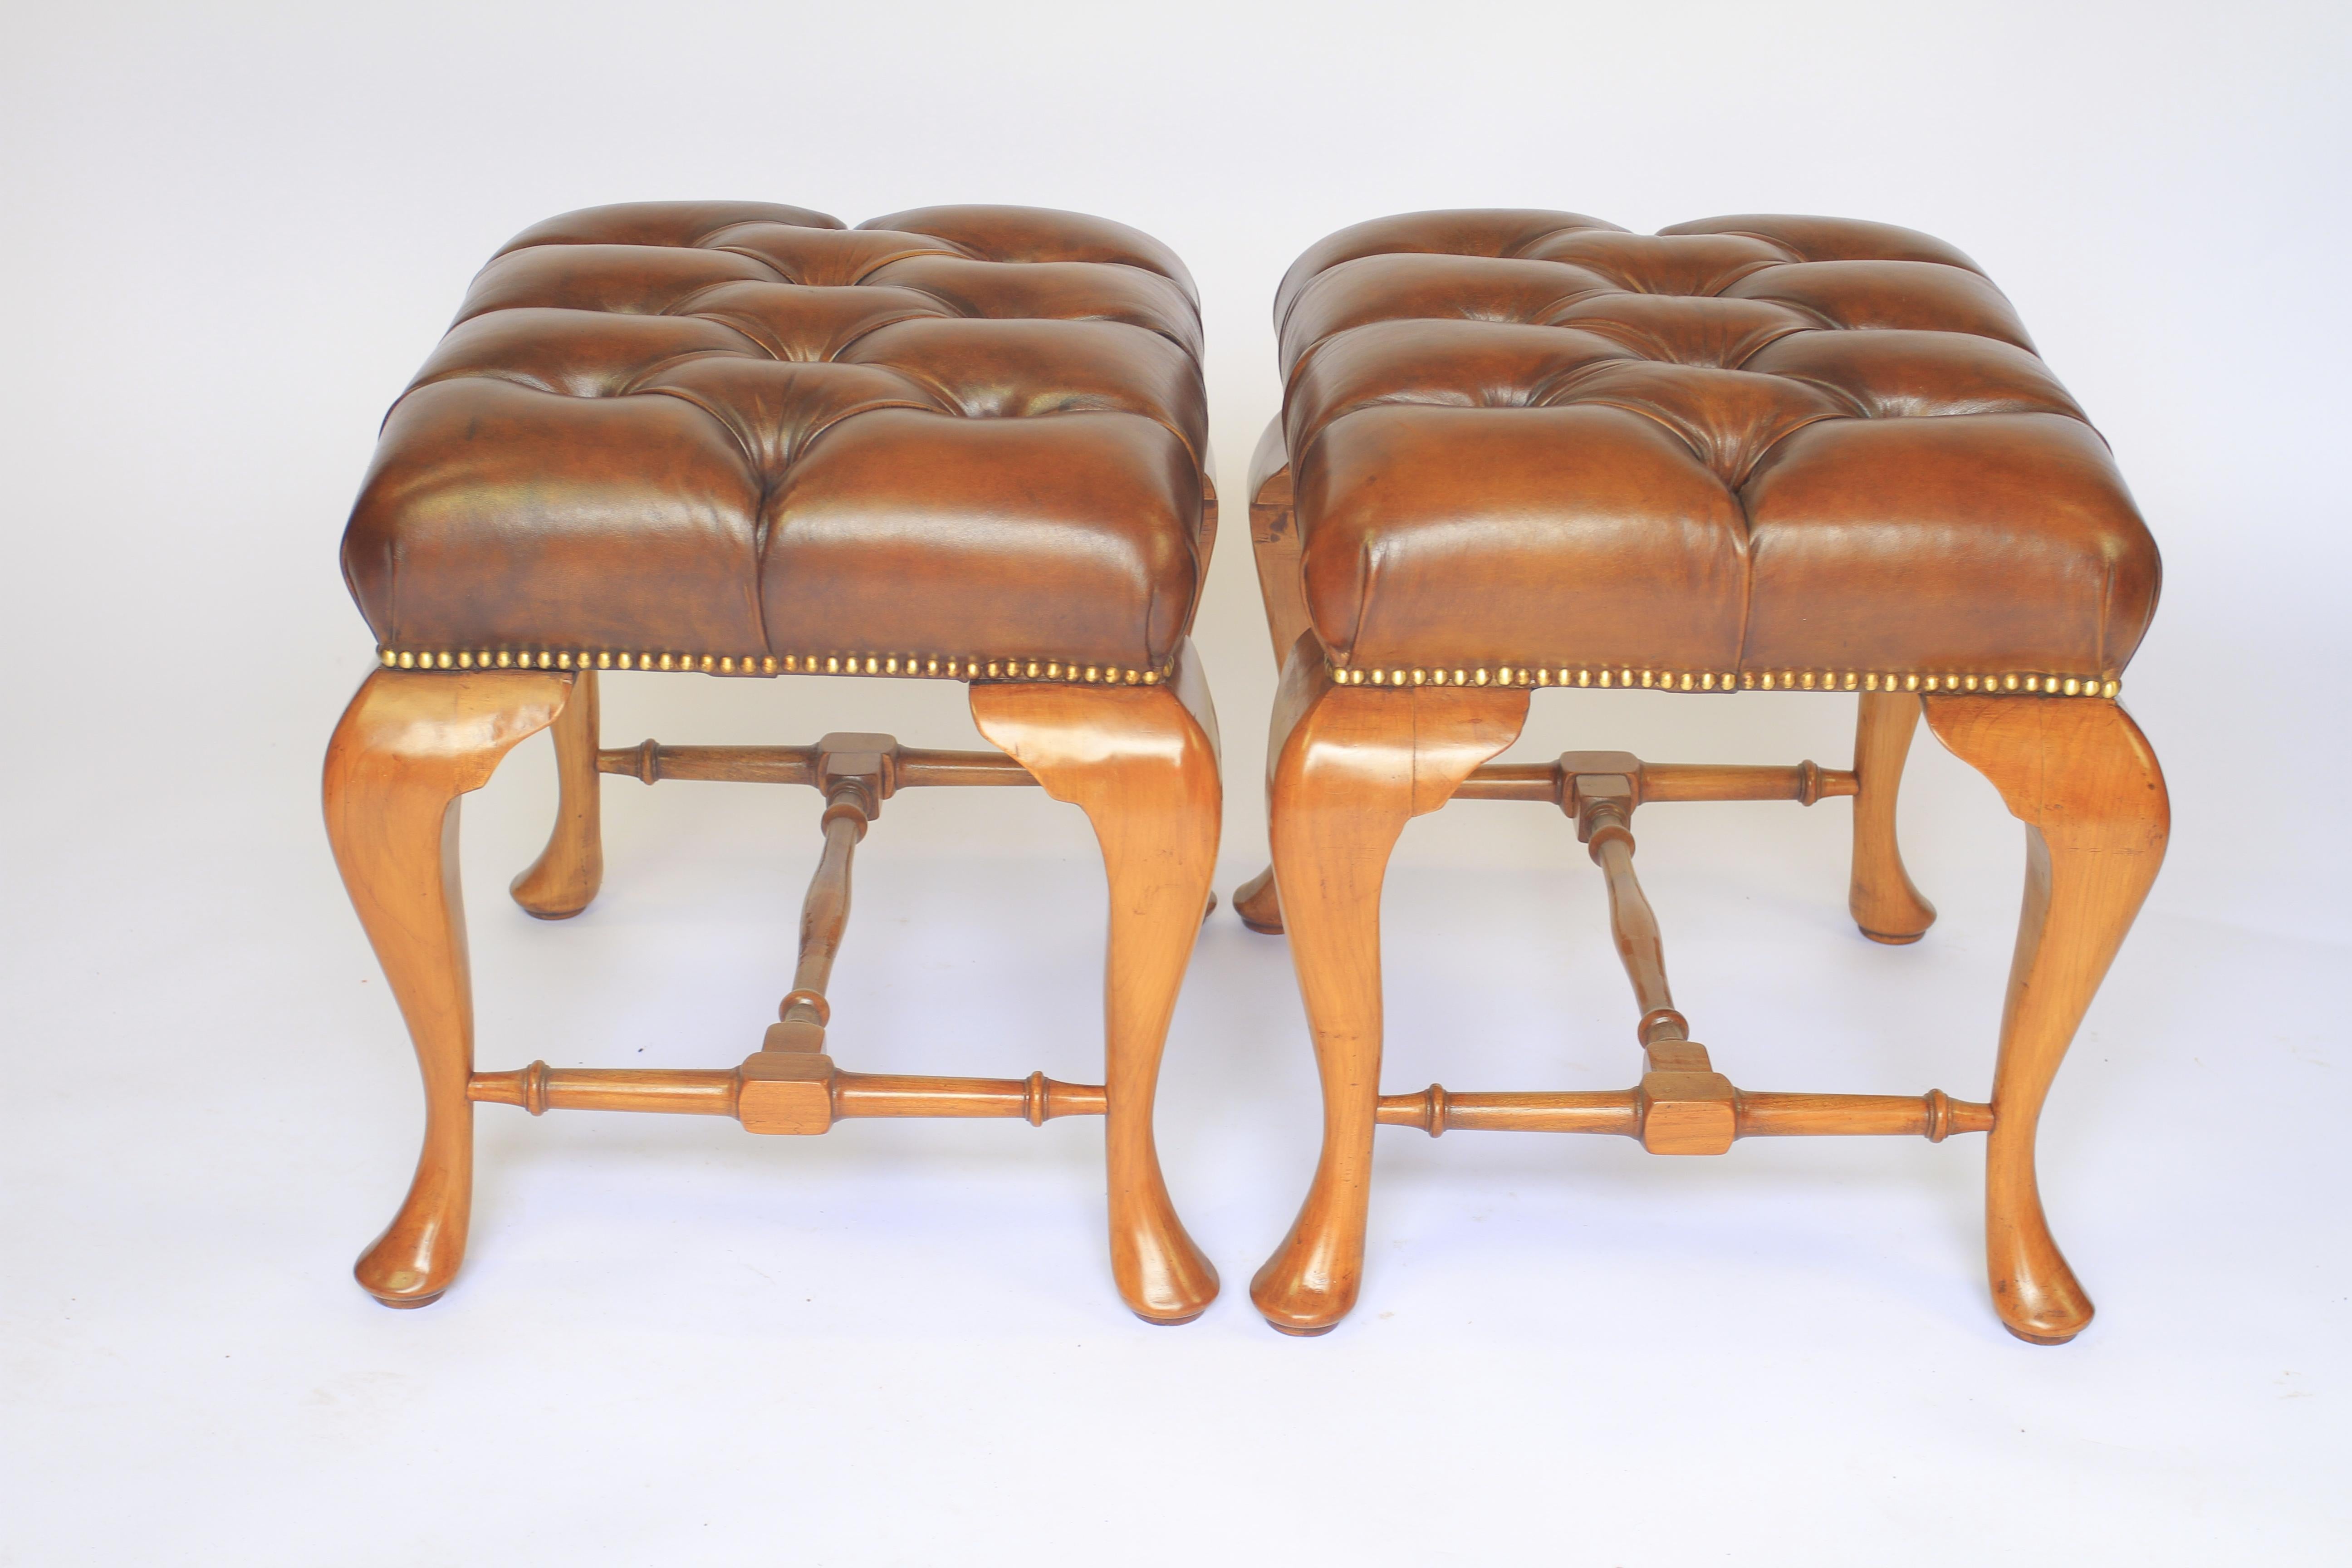 Polished Pair Queen Anne Revival Walnut Foot Stools circa 1920s For Sale